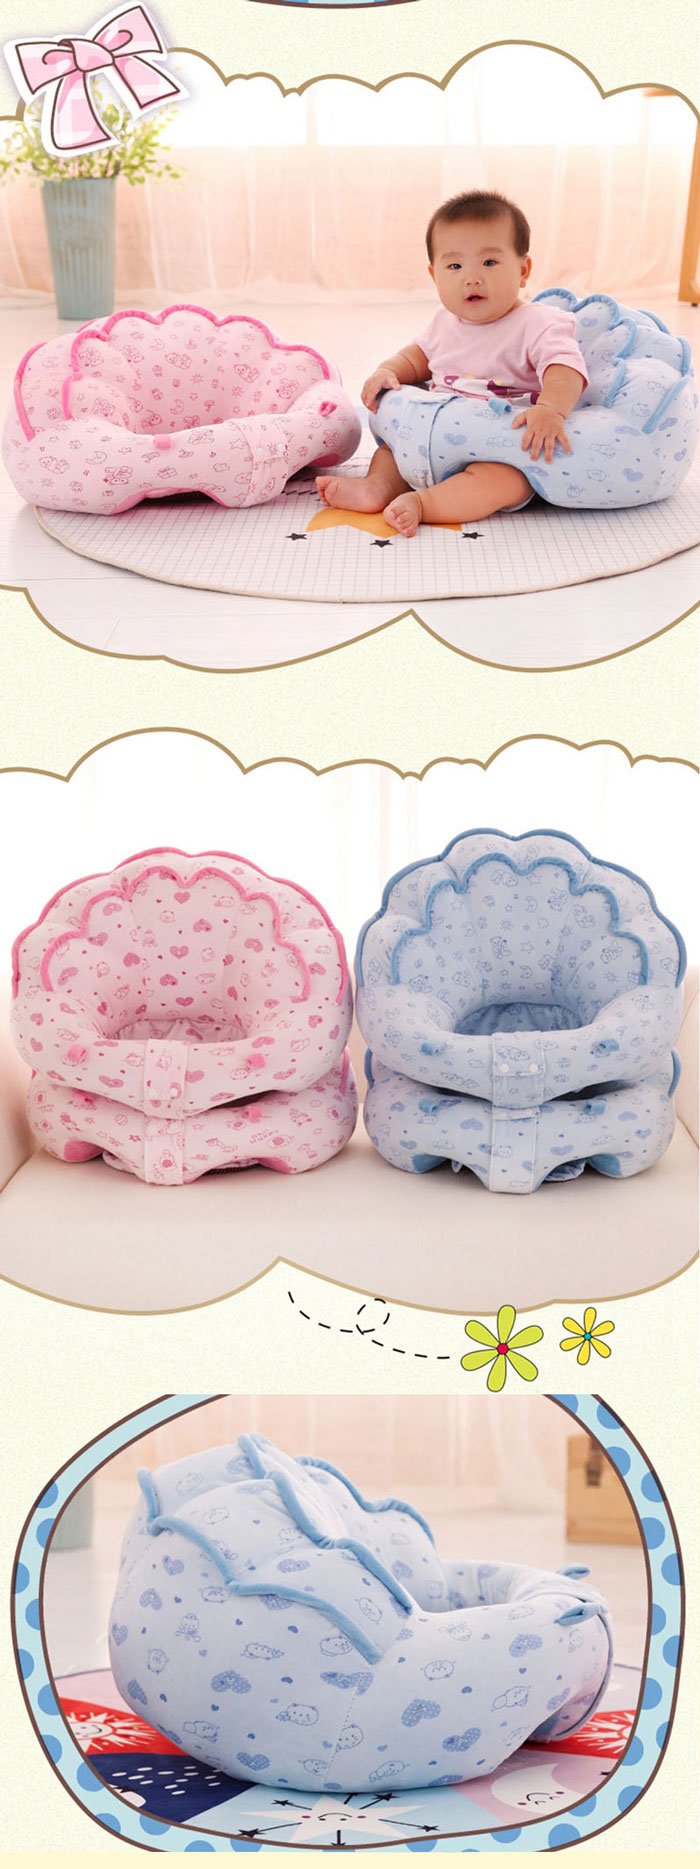 Infant Baby Sofa Support Sit Seat Feeding Chair Nest Cotton